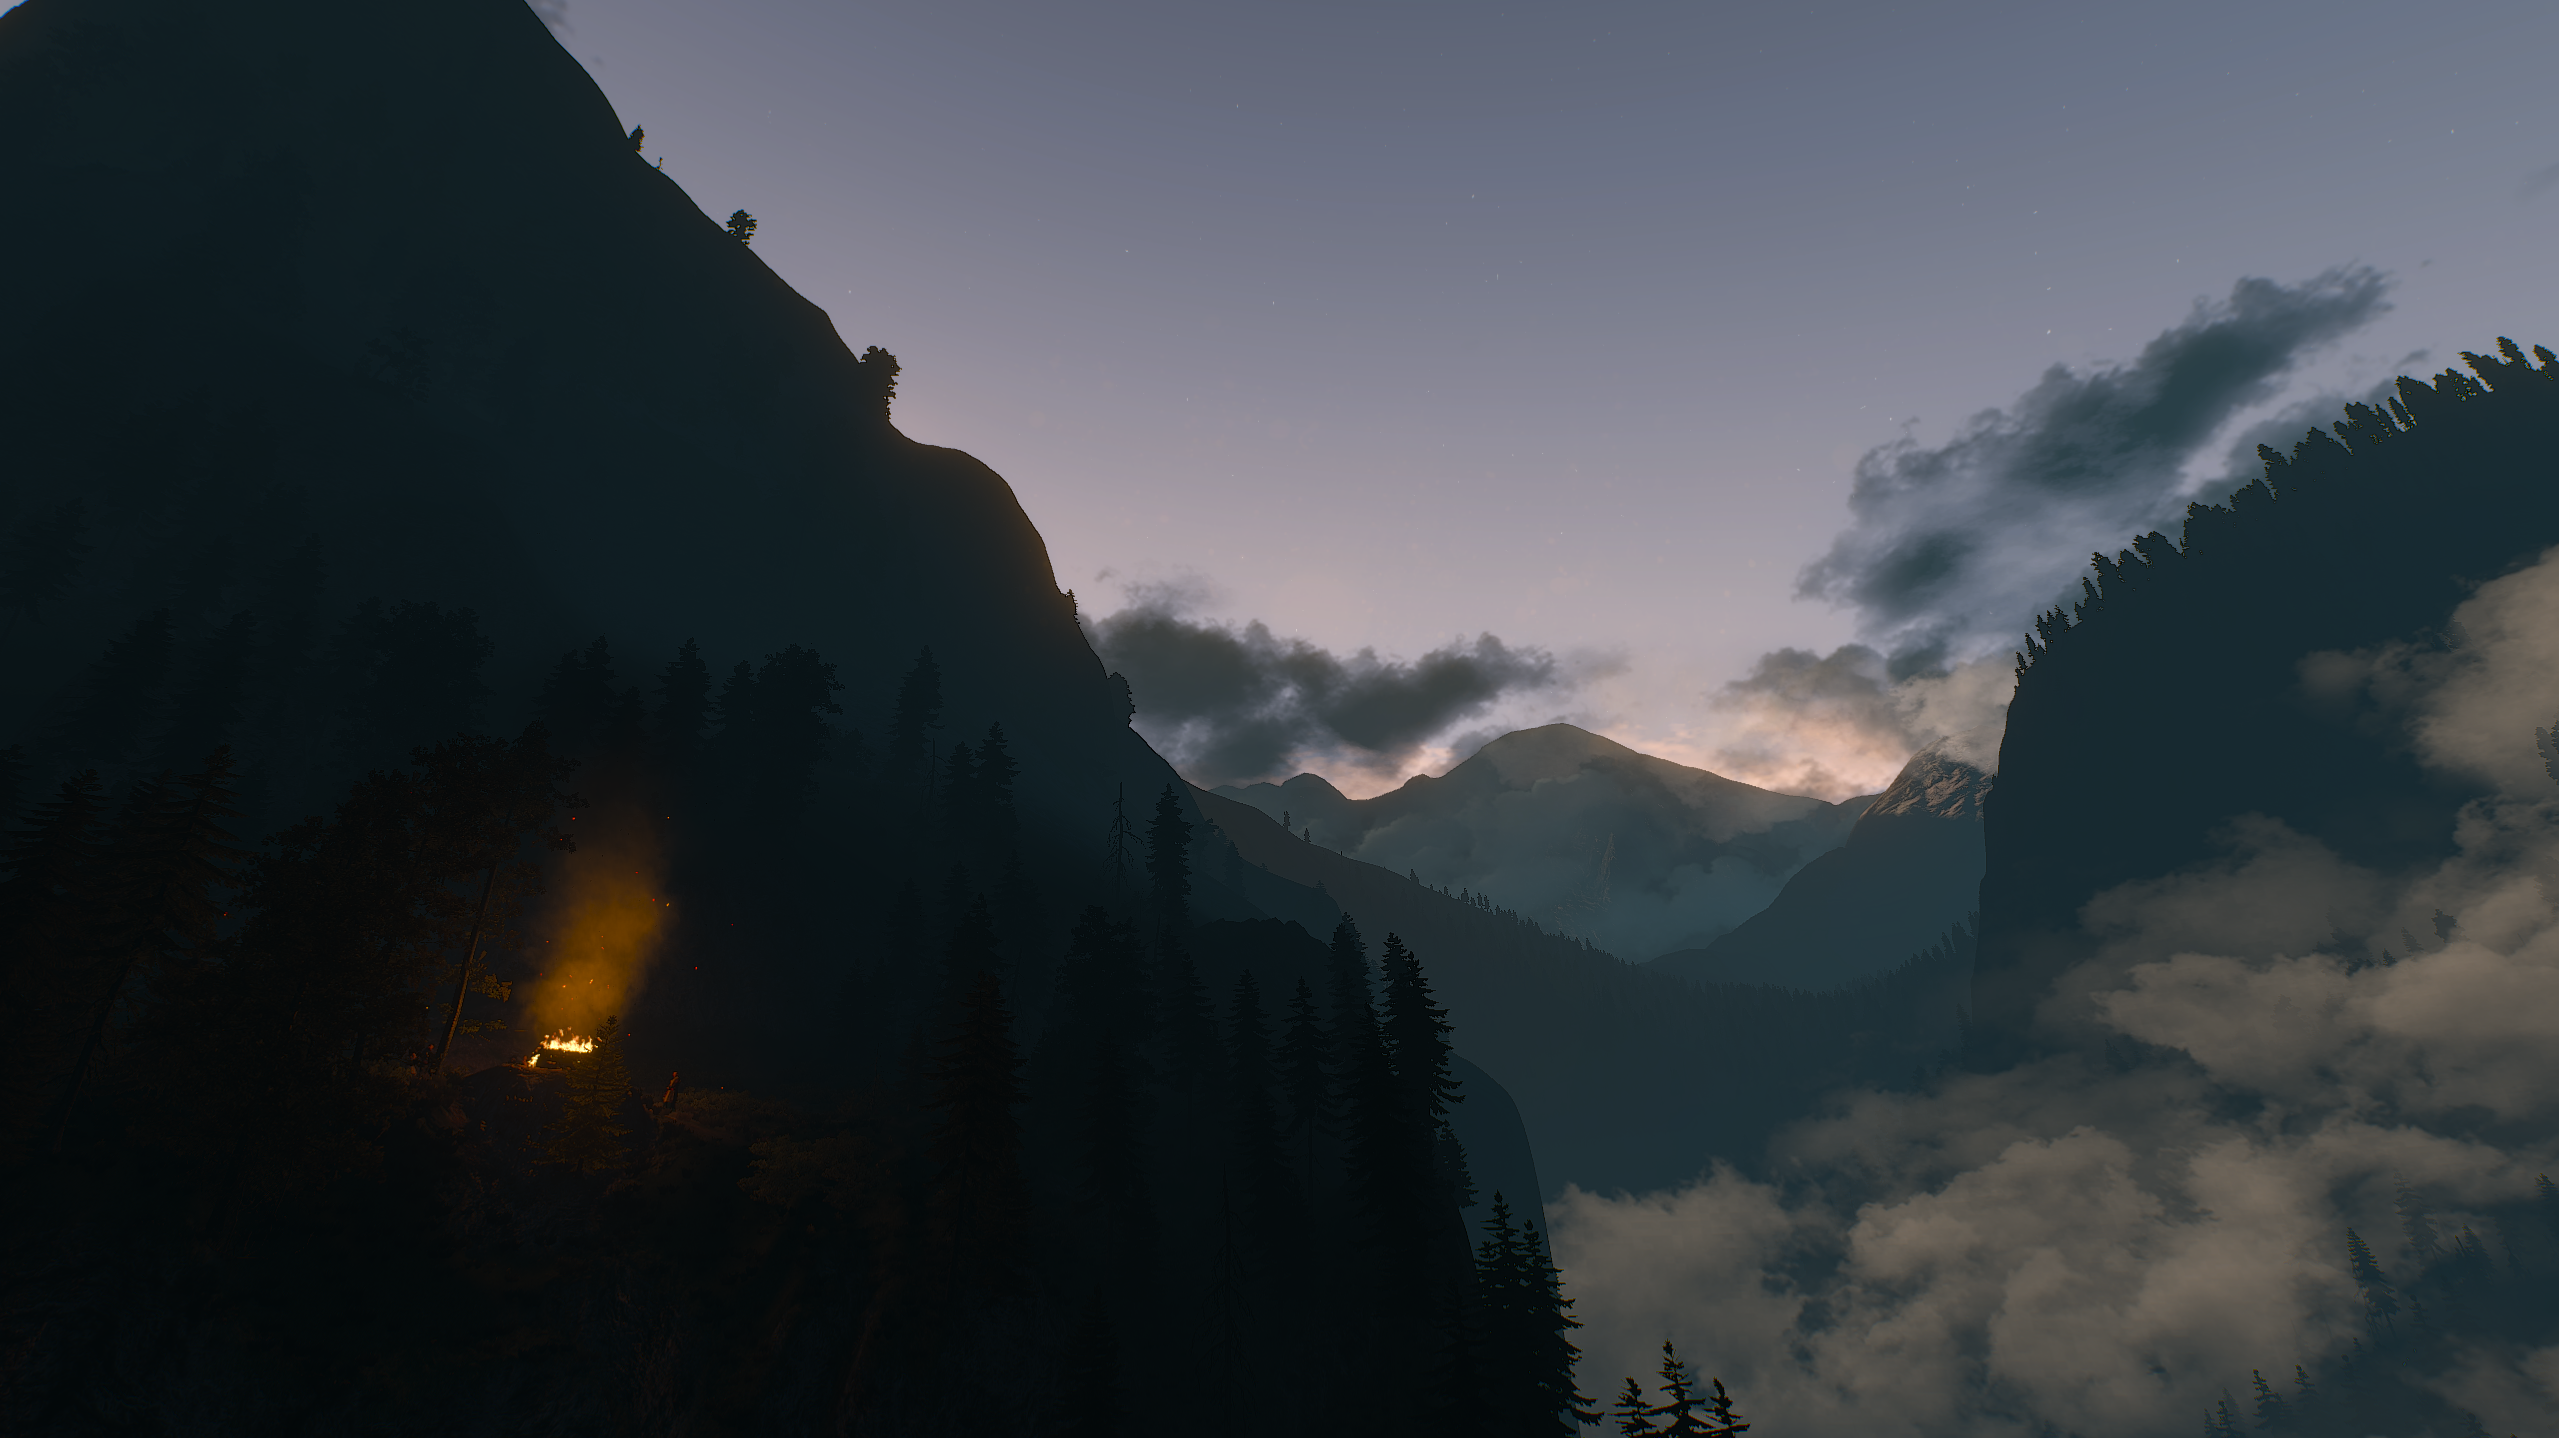 General 2559x1438 PC gaming The Witcher The Witcher 3: Wild Hunt landscape mountains Yennefer of Vengerberg video game landscape